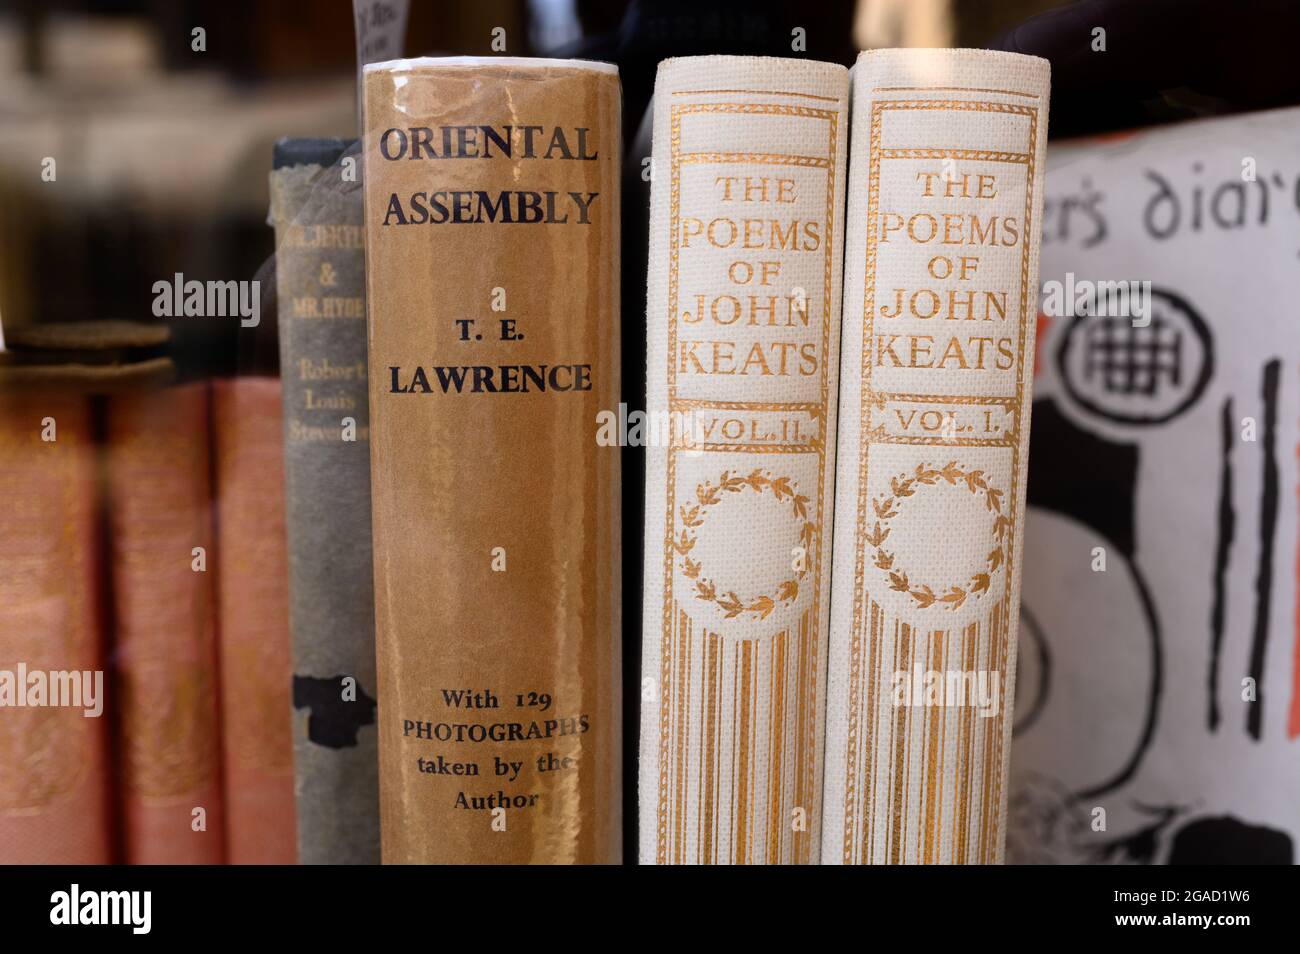 The Poems of John Keats books plus Oriental Assembly by T.E. Lawrence in a shop window. Stock Photo